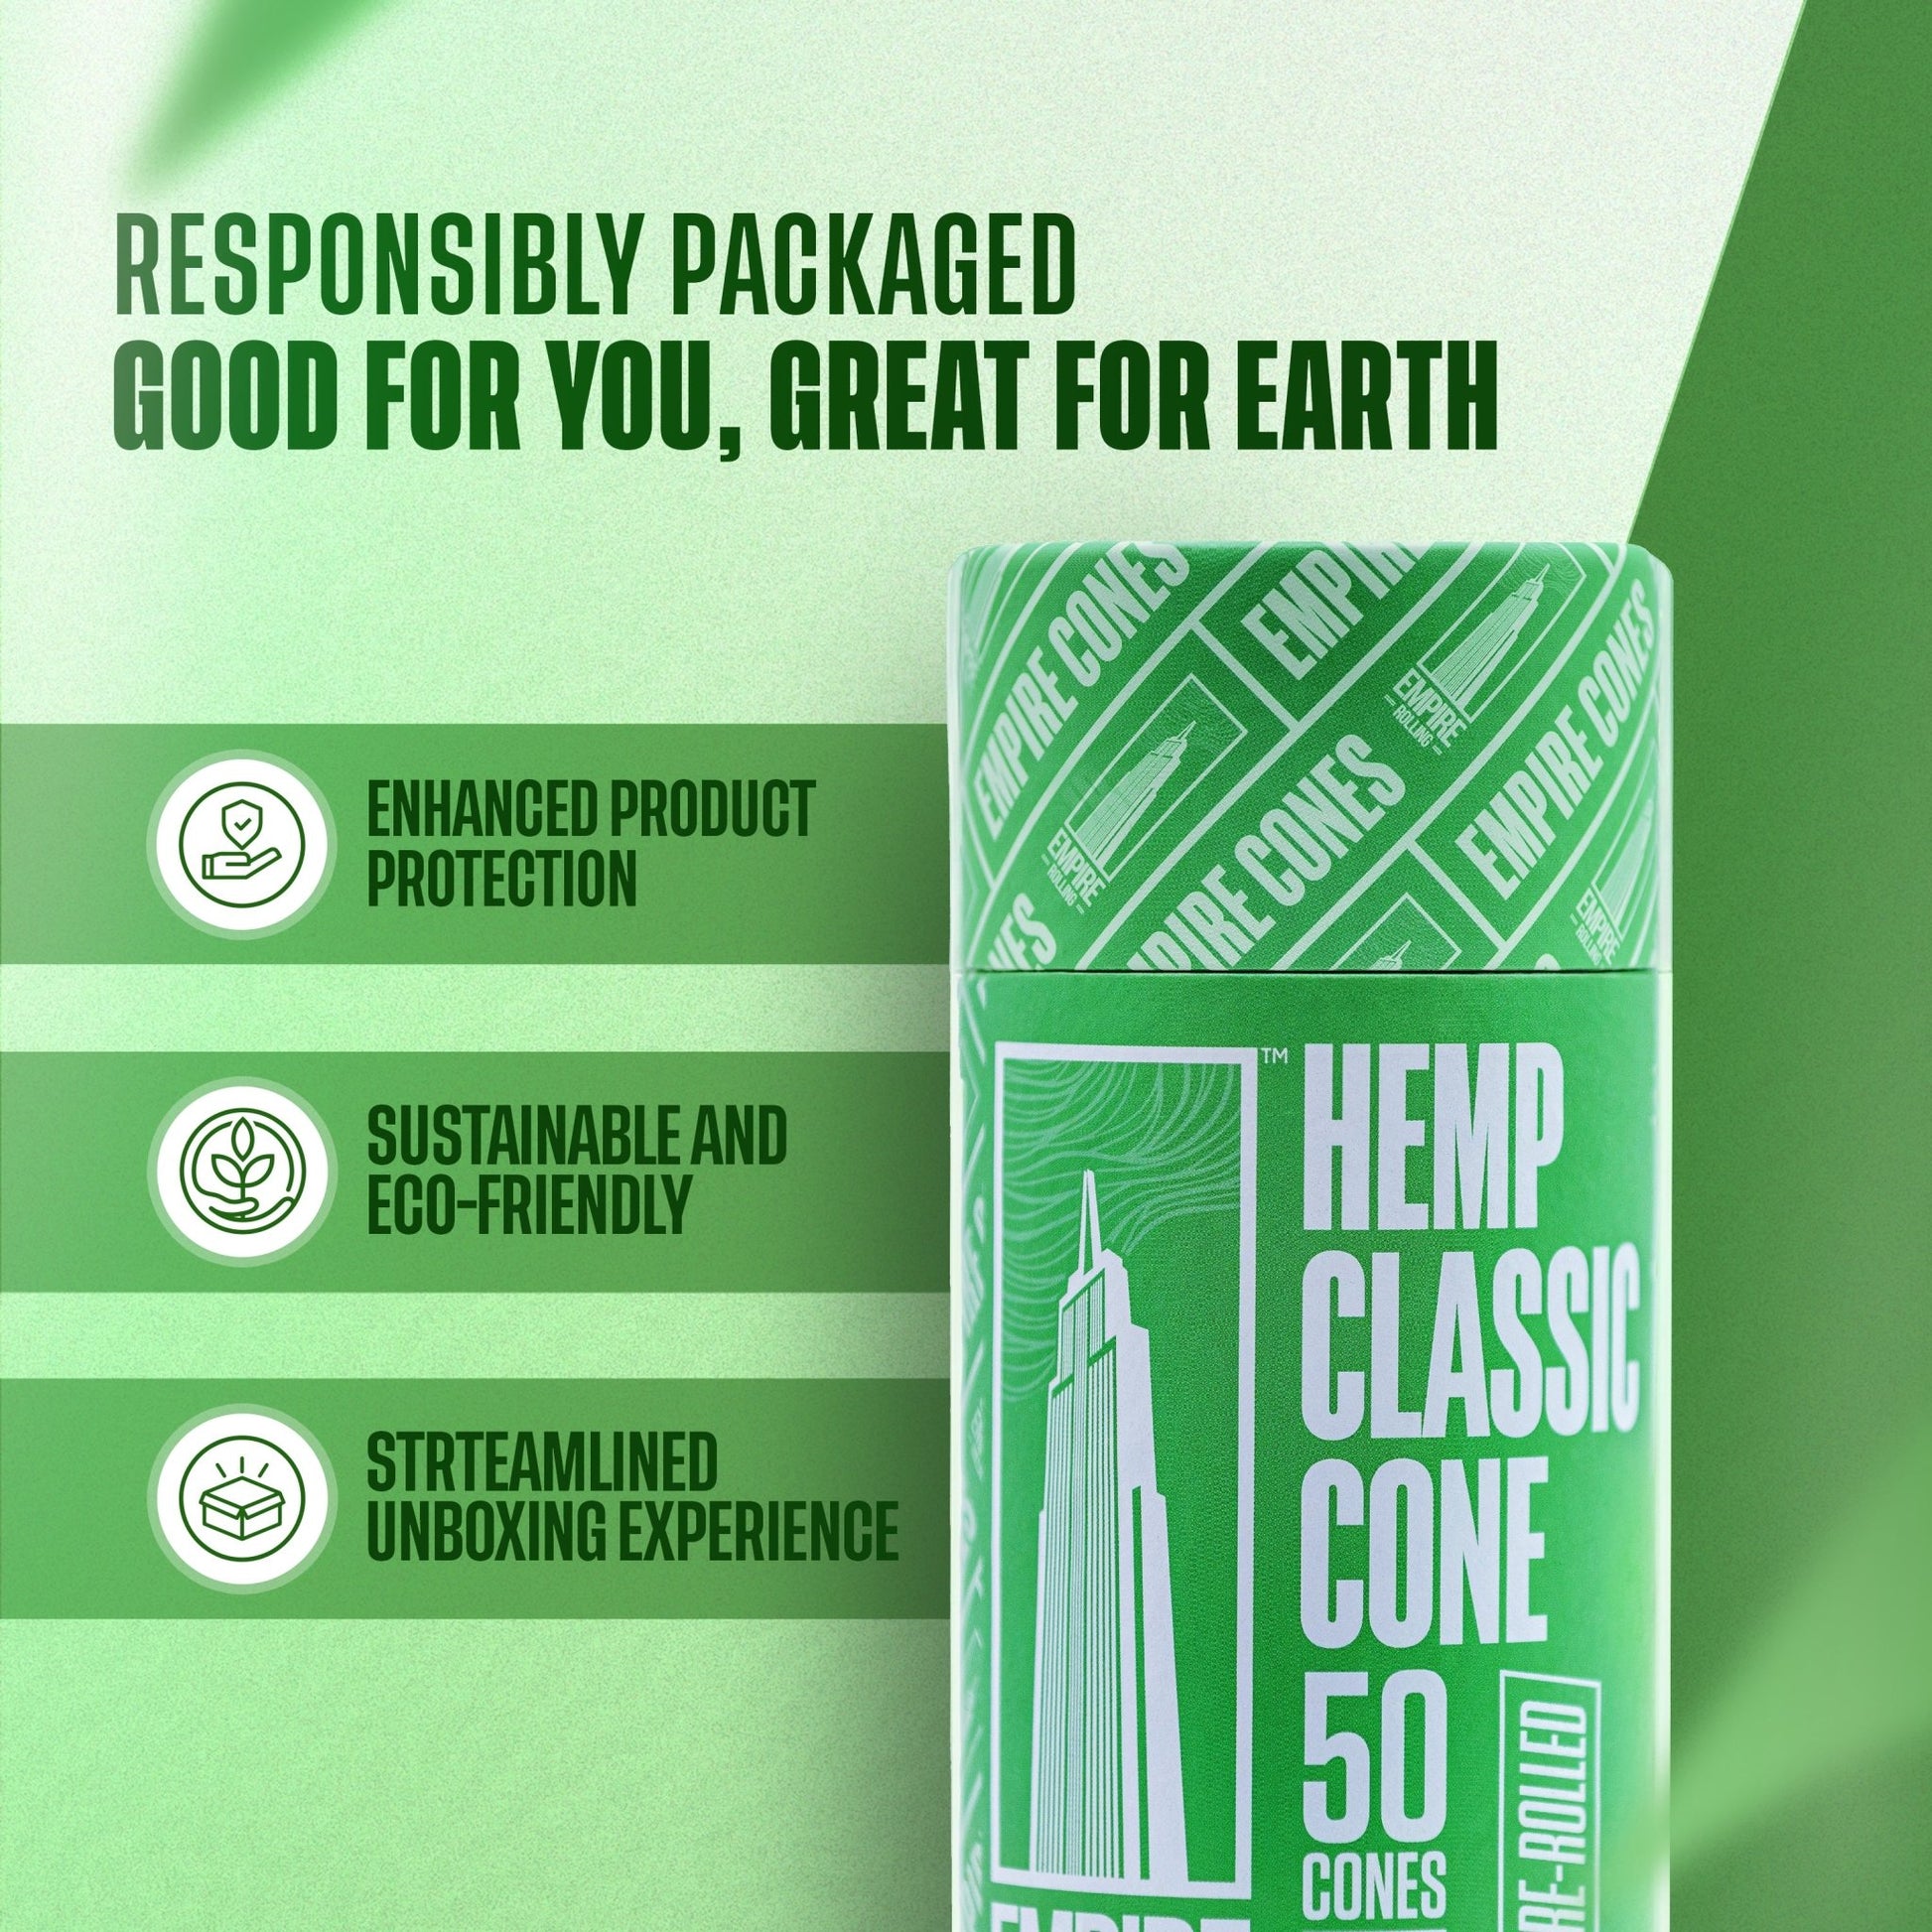 Empire Rolling's King Size Organic Hemp Rolling Papers, eco-friendly and crafted with high-quality, natural materials for a premium smoking experience.Ultra Smooth Hemp Cones 50 Count - Empire Rolling Papers